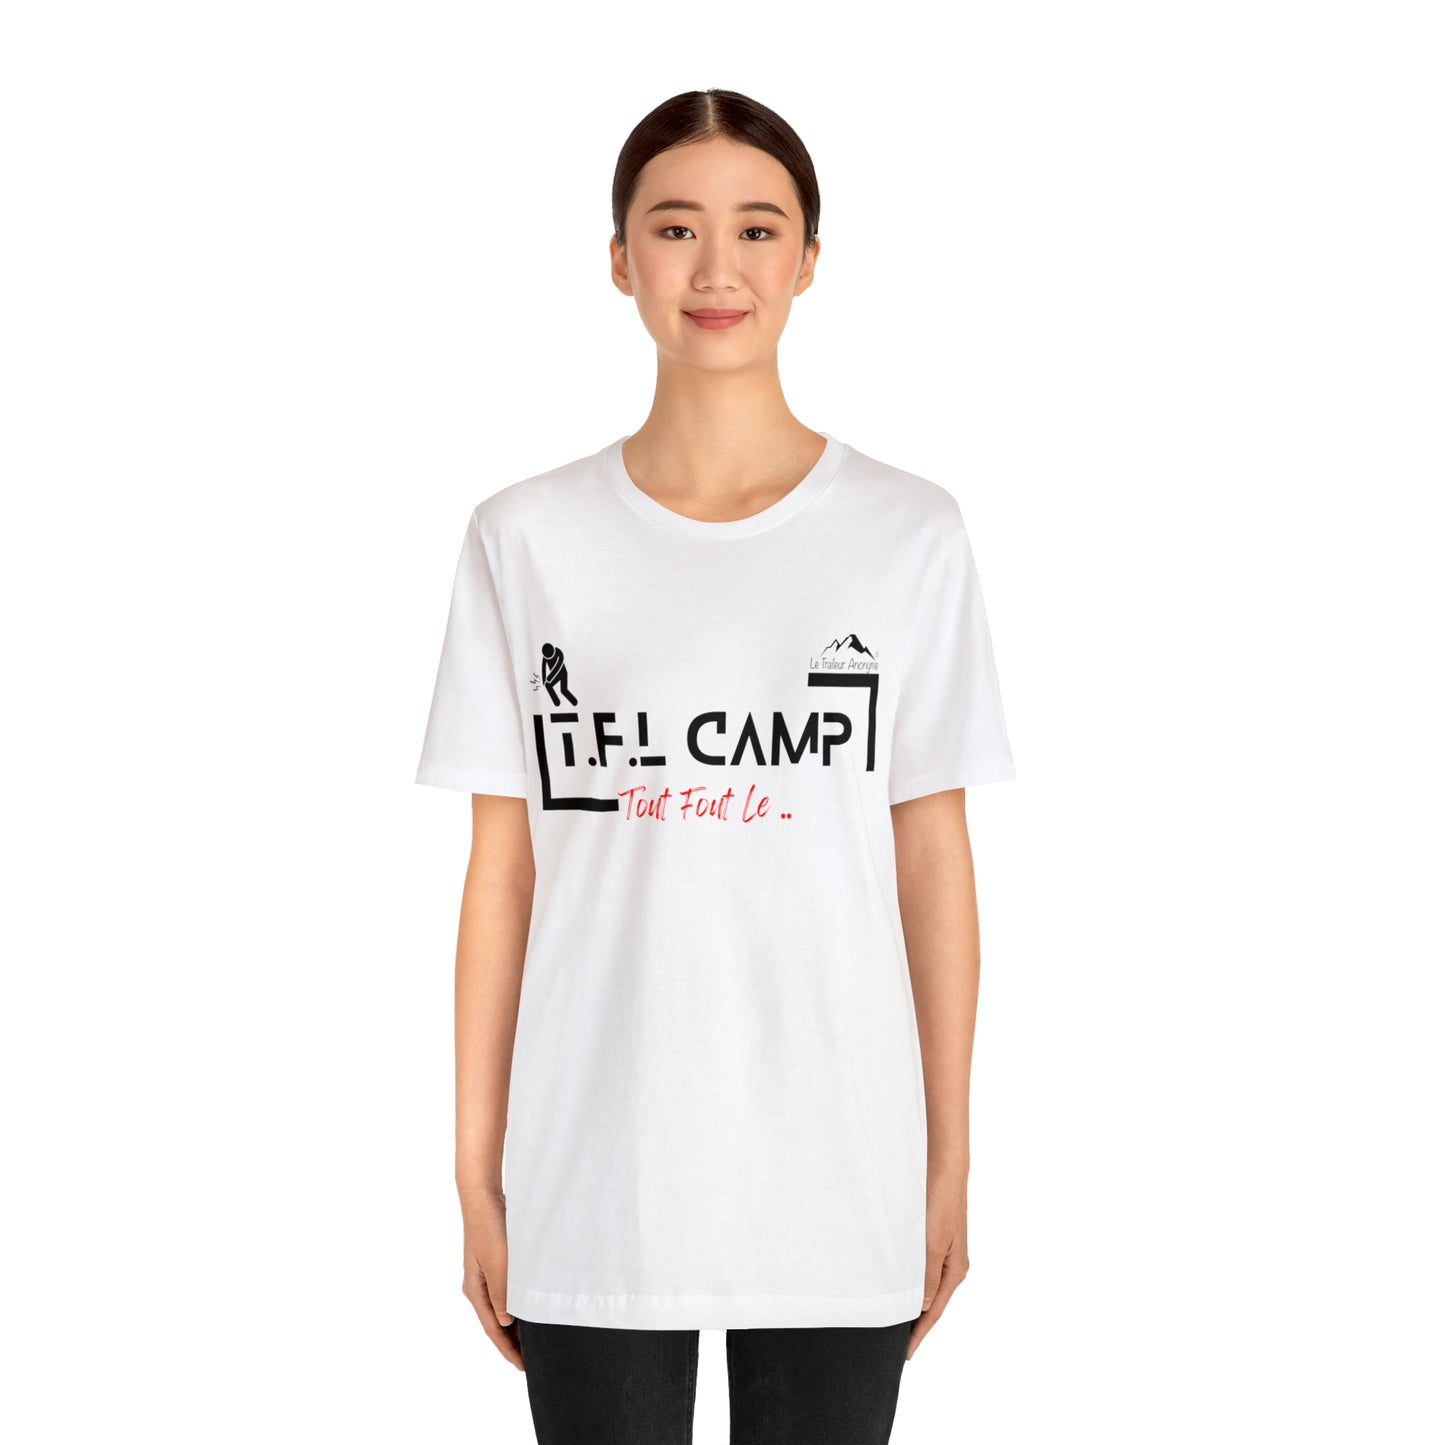 Jersey T-Shirt - Unisex - "TFL" Collection (950)